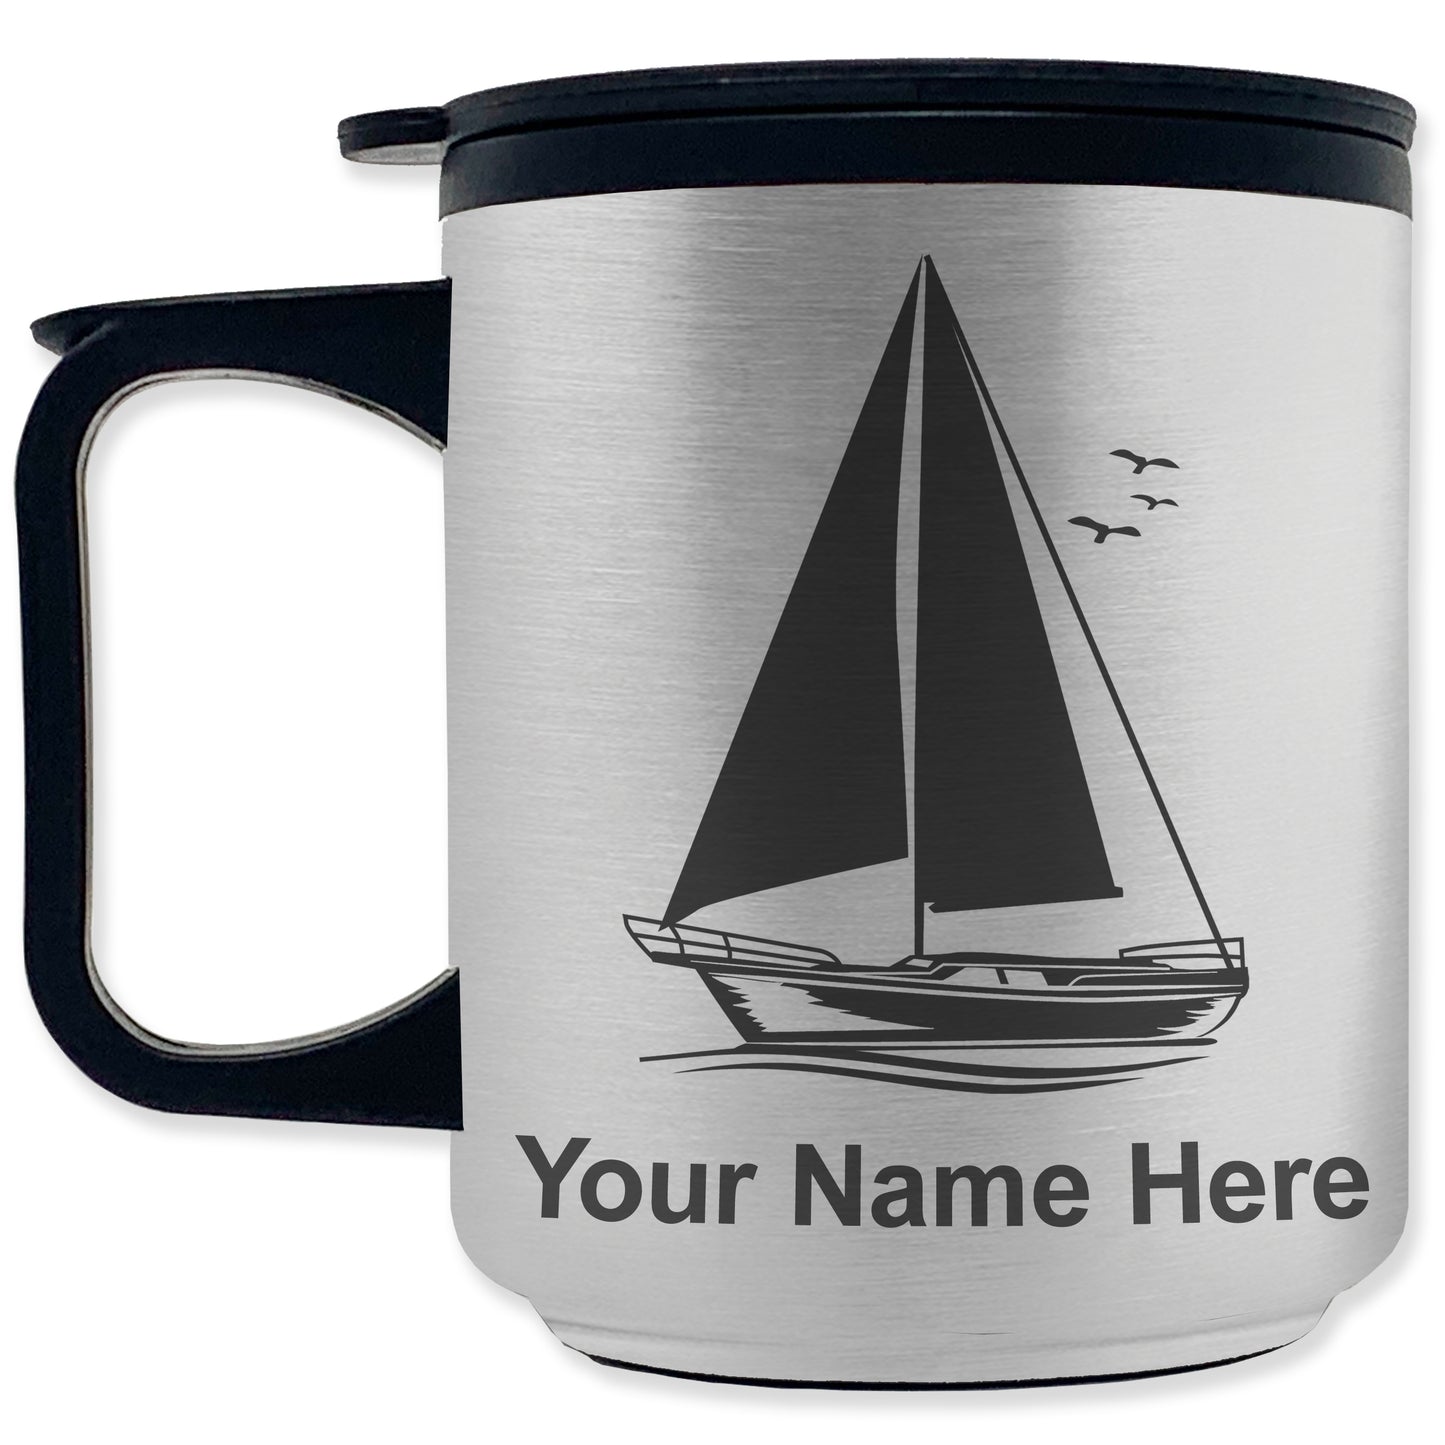 Coffee Travel Mug, Sailboat, Personalized Engraving Included